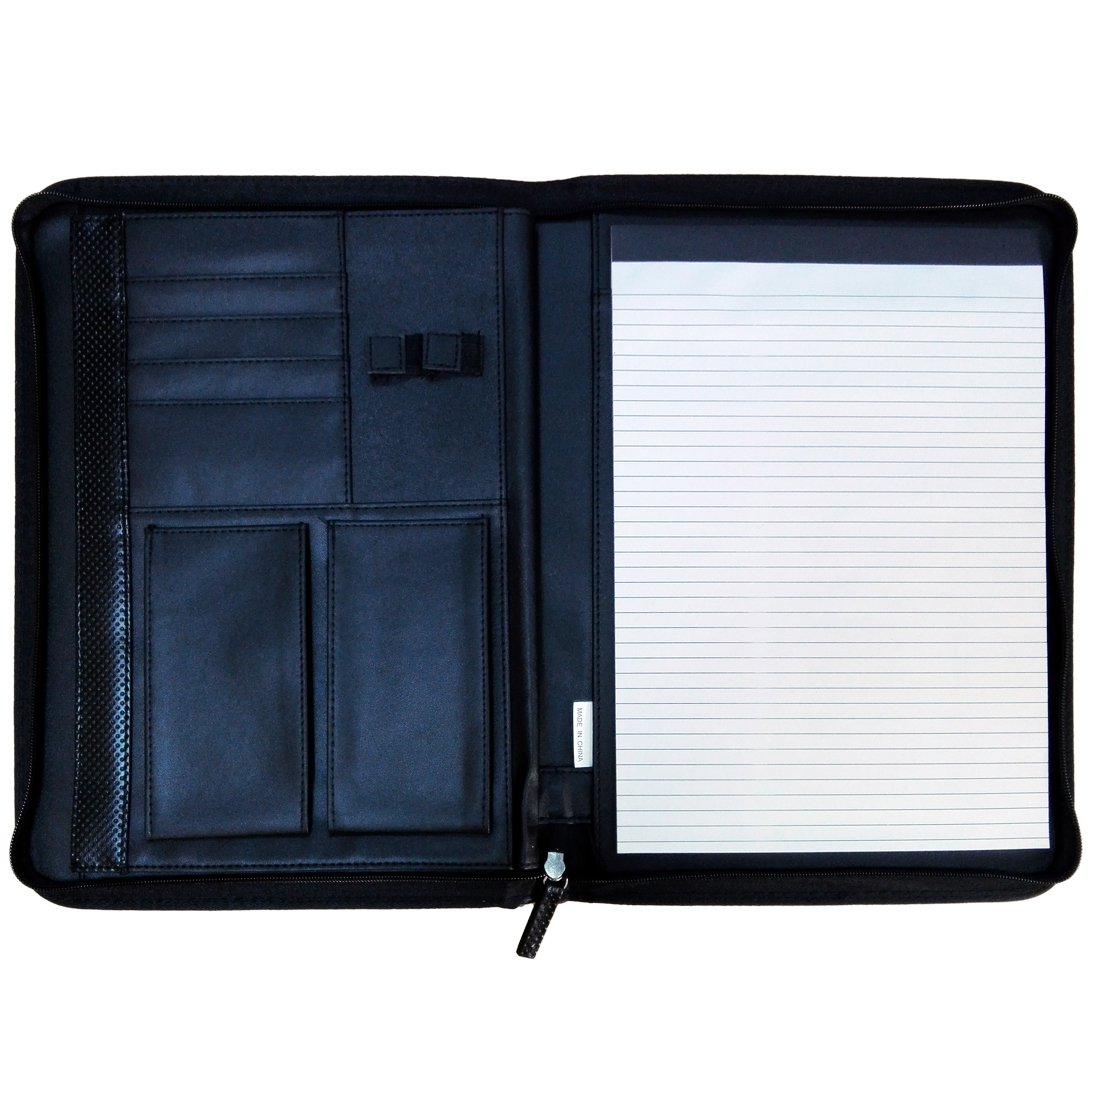 SAB Protofolio With Zipper and Note Pad BK/BL 